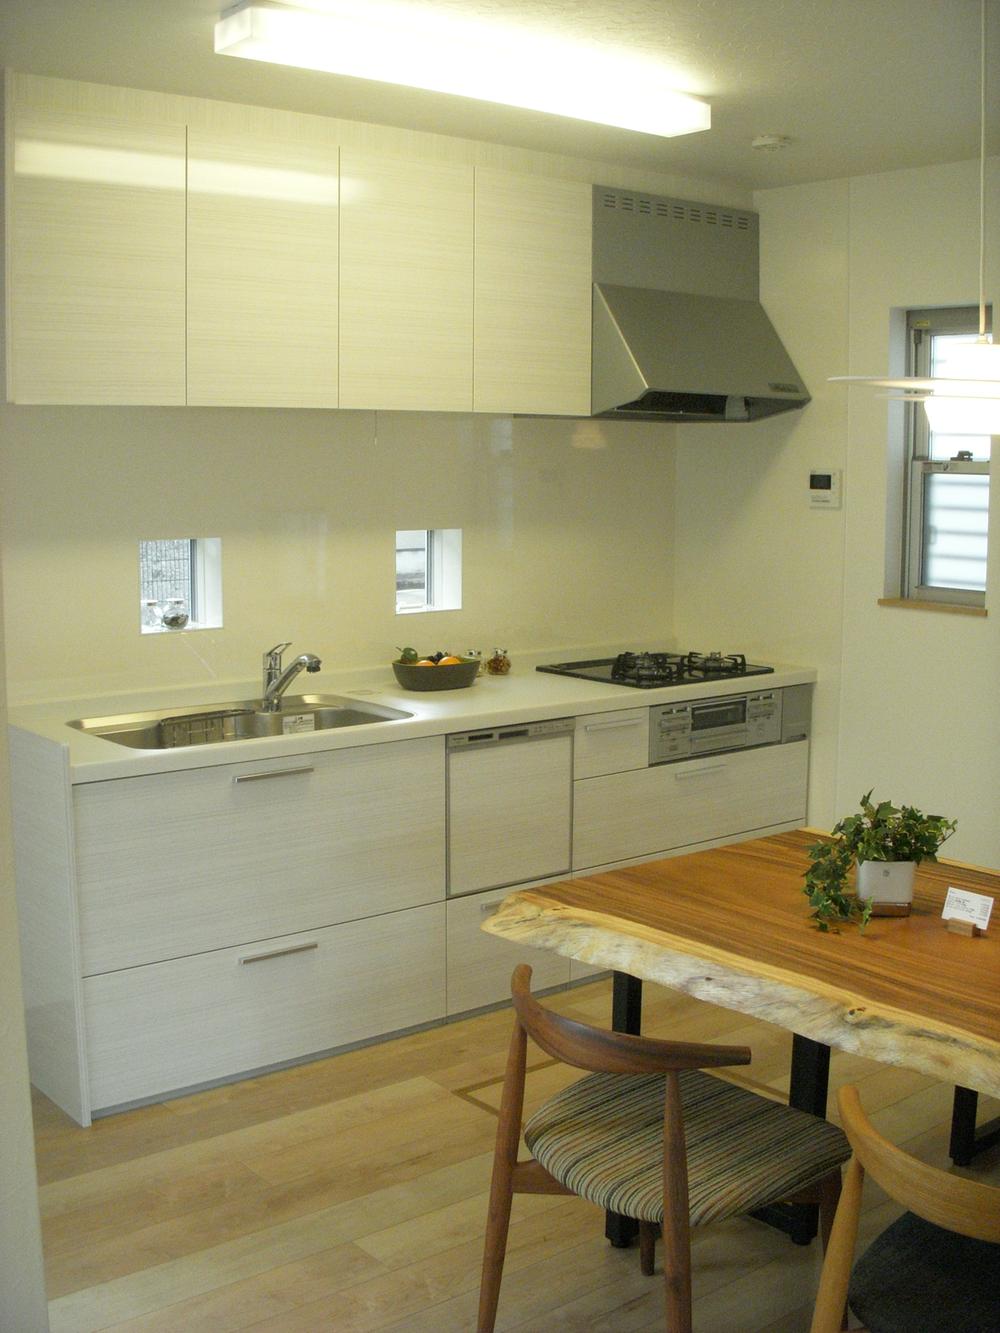 Model house photo. Our model house introspection (our specification kitchen: artificial substitute stone counter ・ Dishwasher)